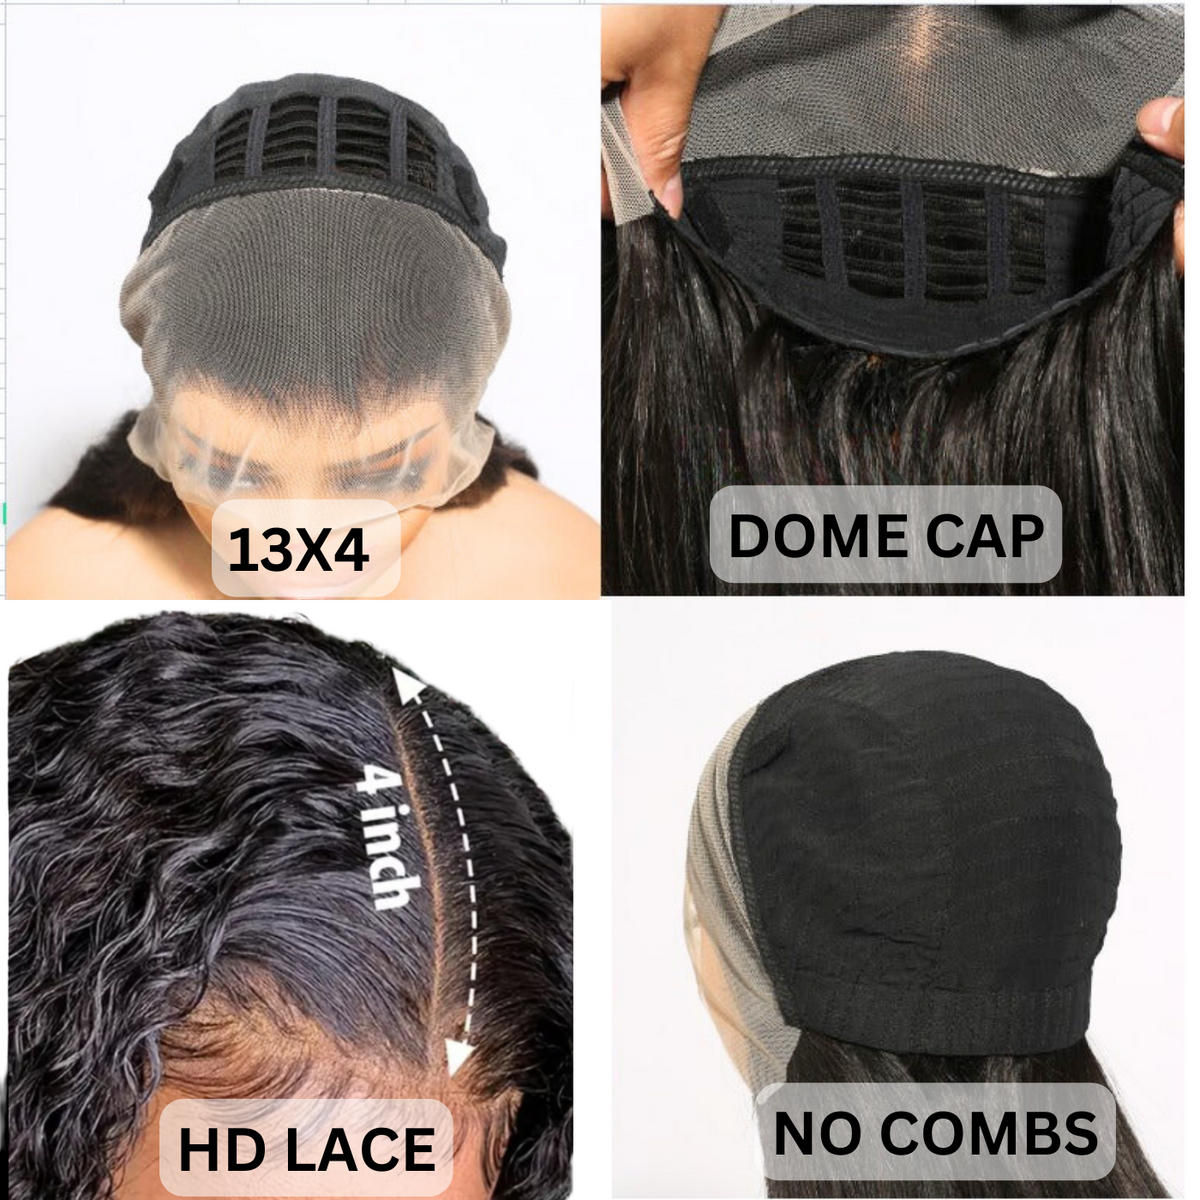 13x4 Full Frontal Lace Front Wig Dome Cap